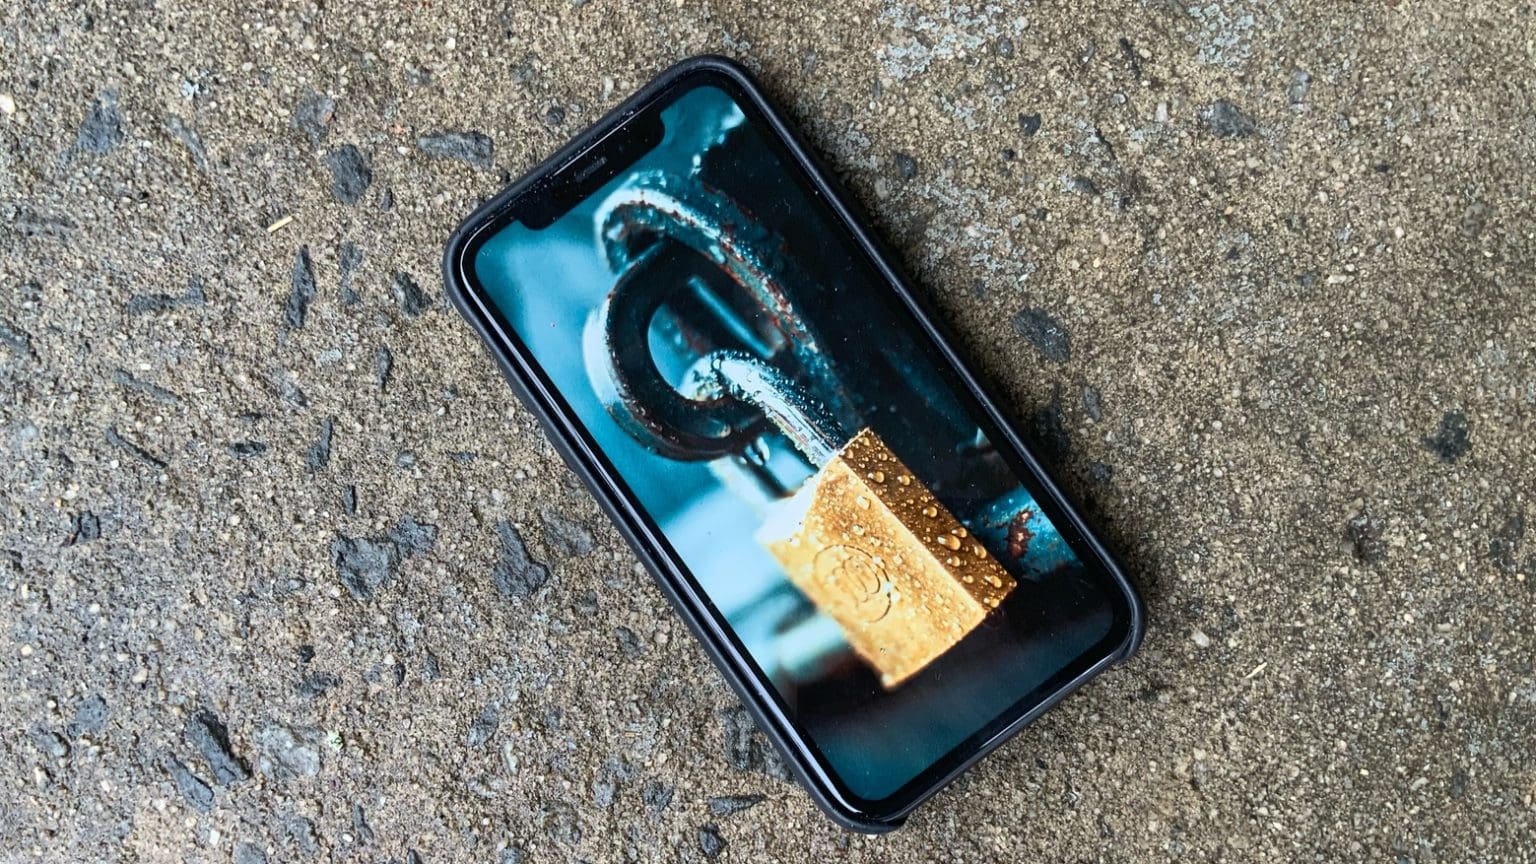 The FBI finally hacked an iPhone 11